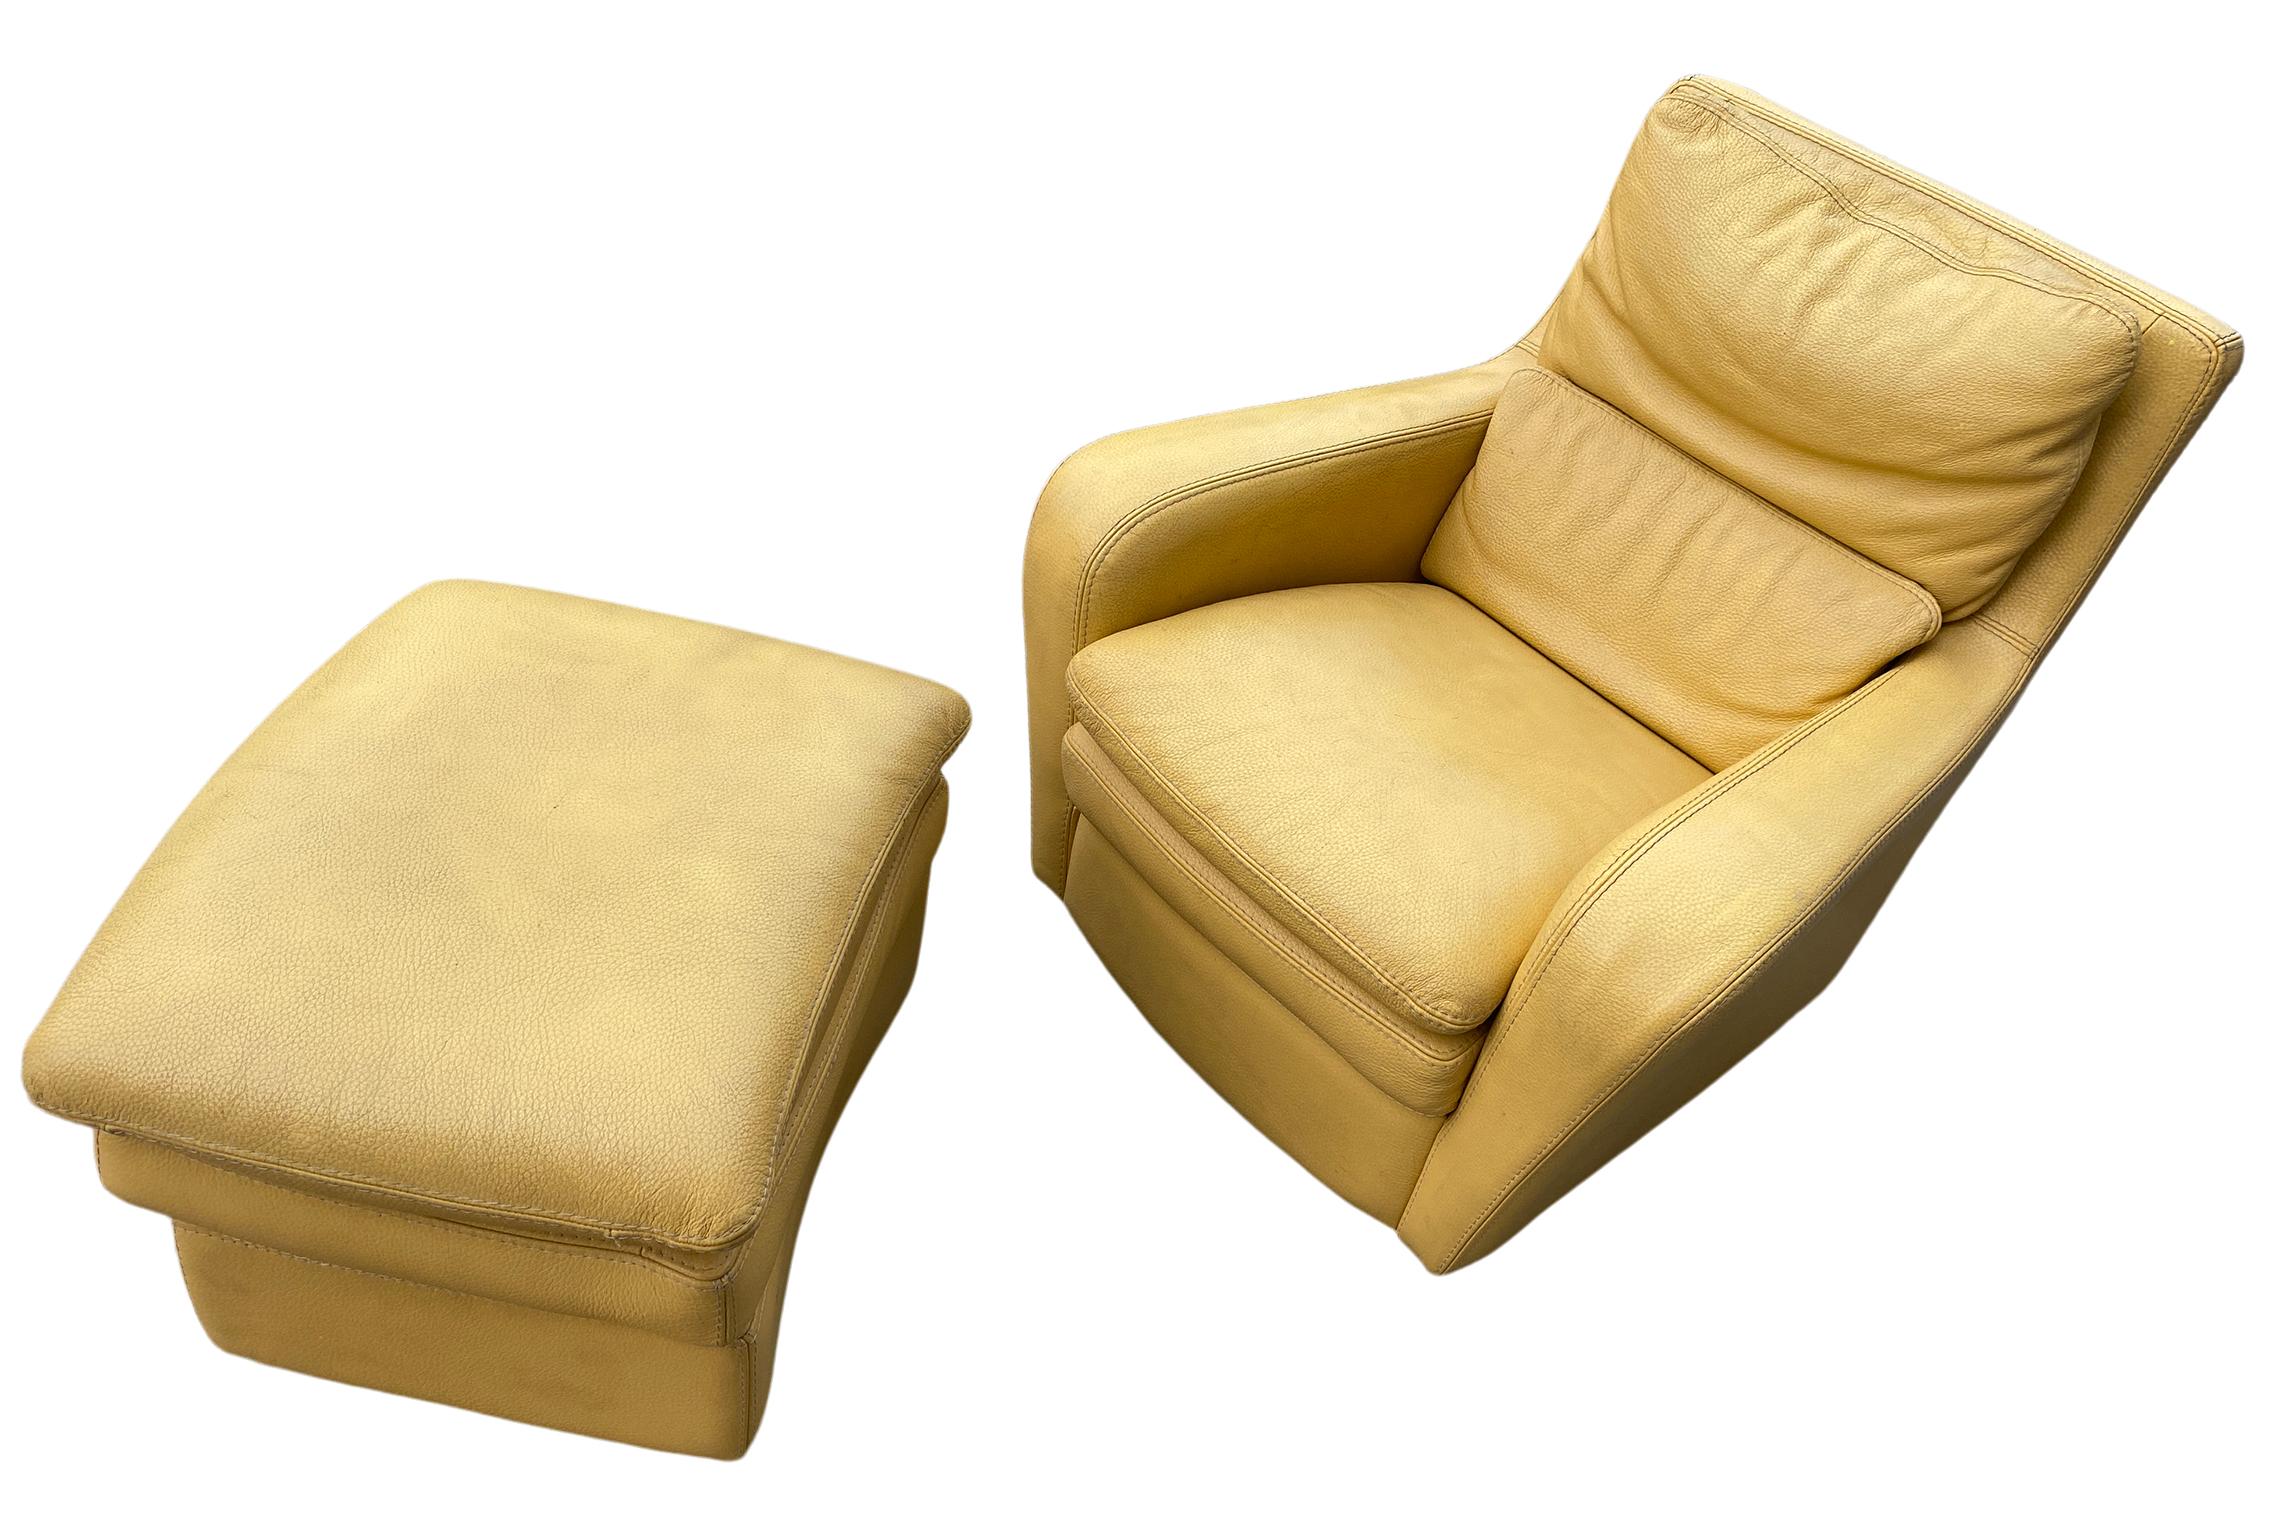 Mid-Century Modern Modern Design Italian Yellow Leather Lounge Chair with Ottoman by Roche Bobois